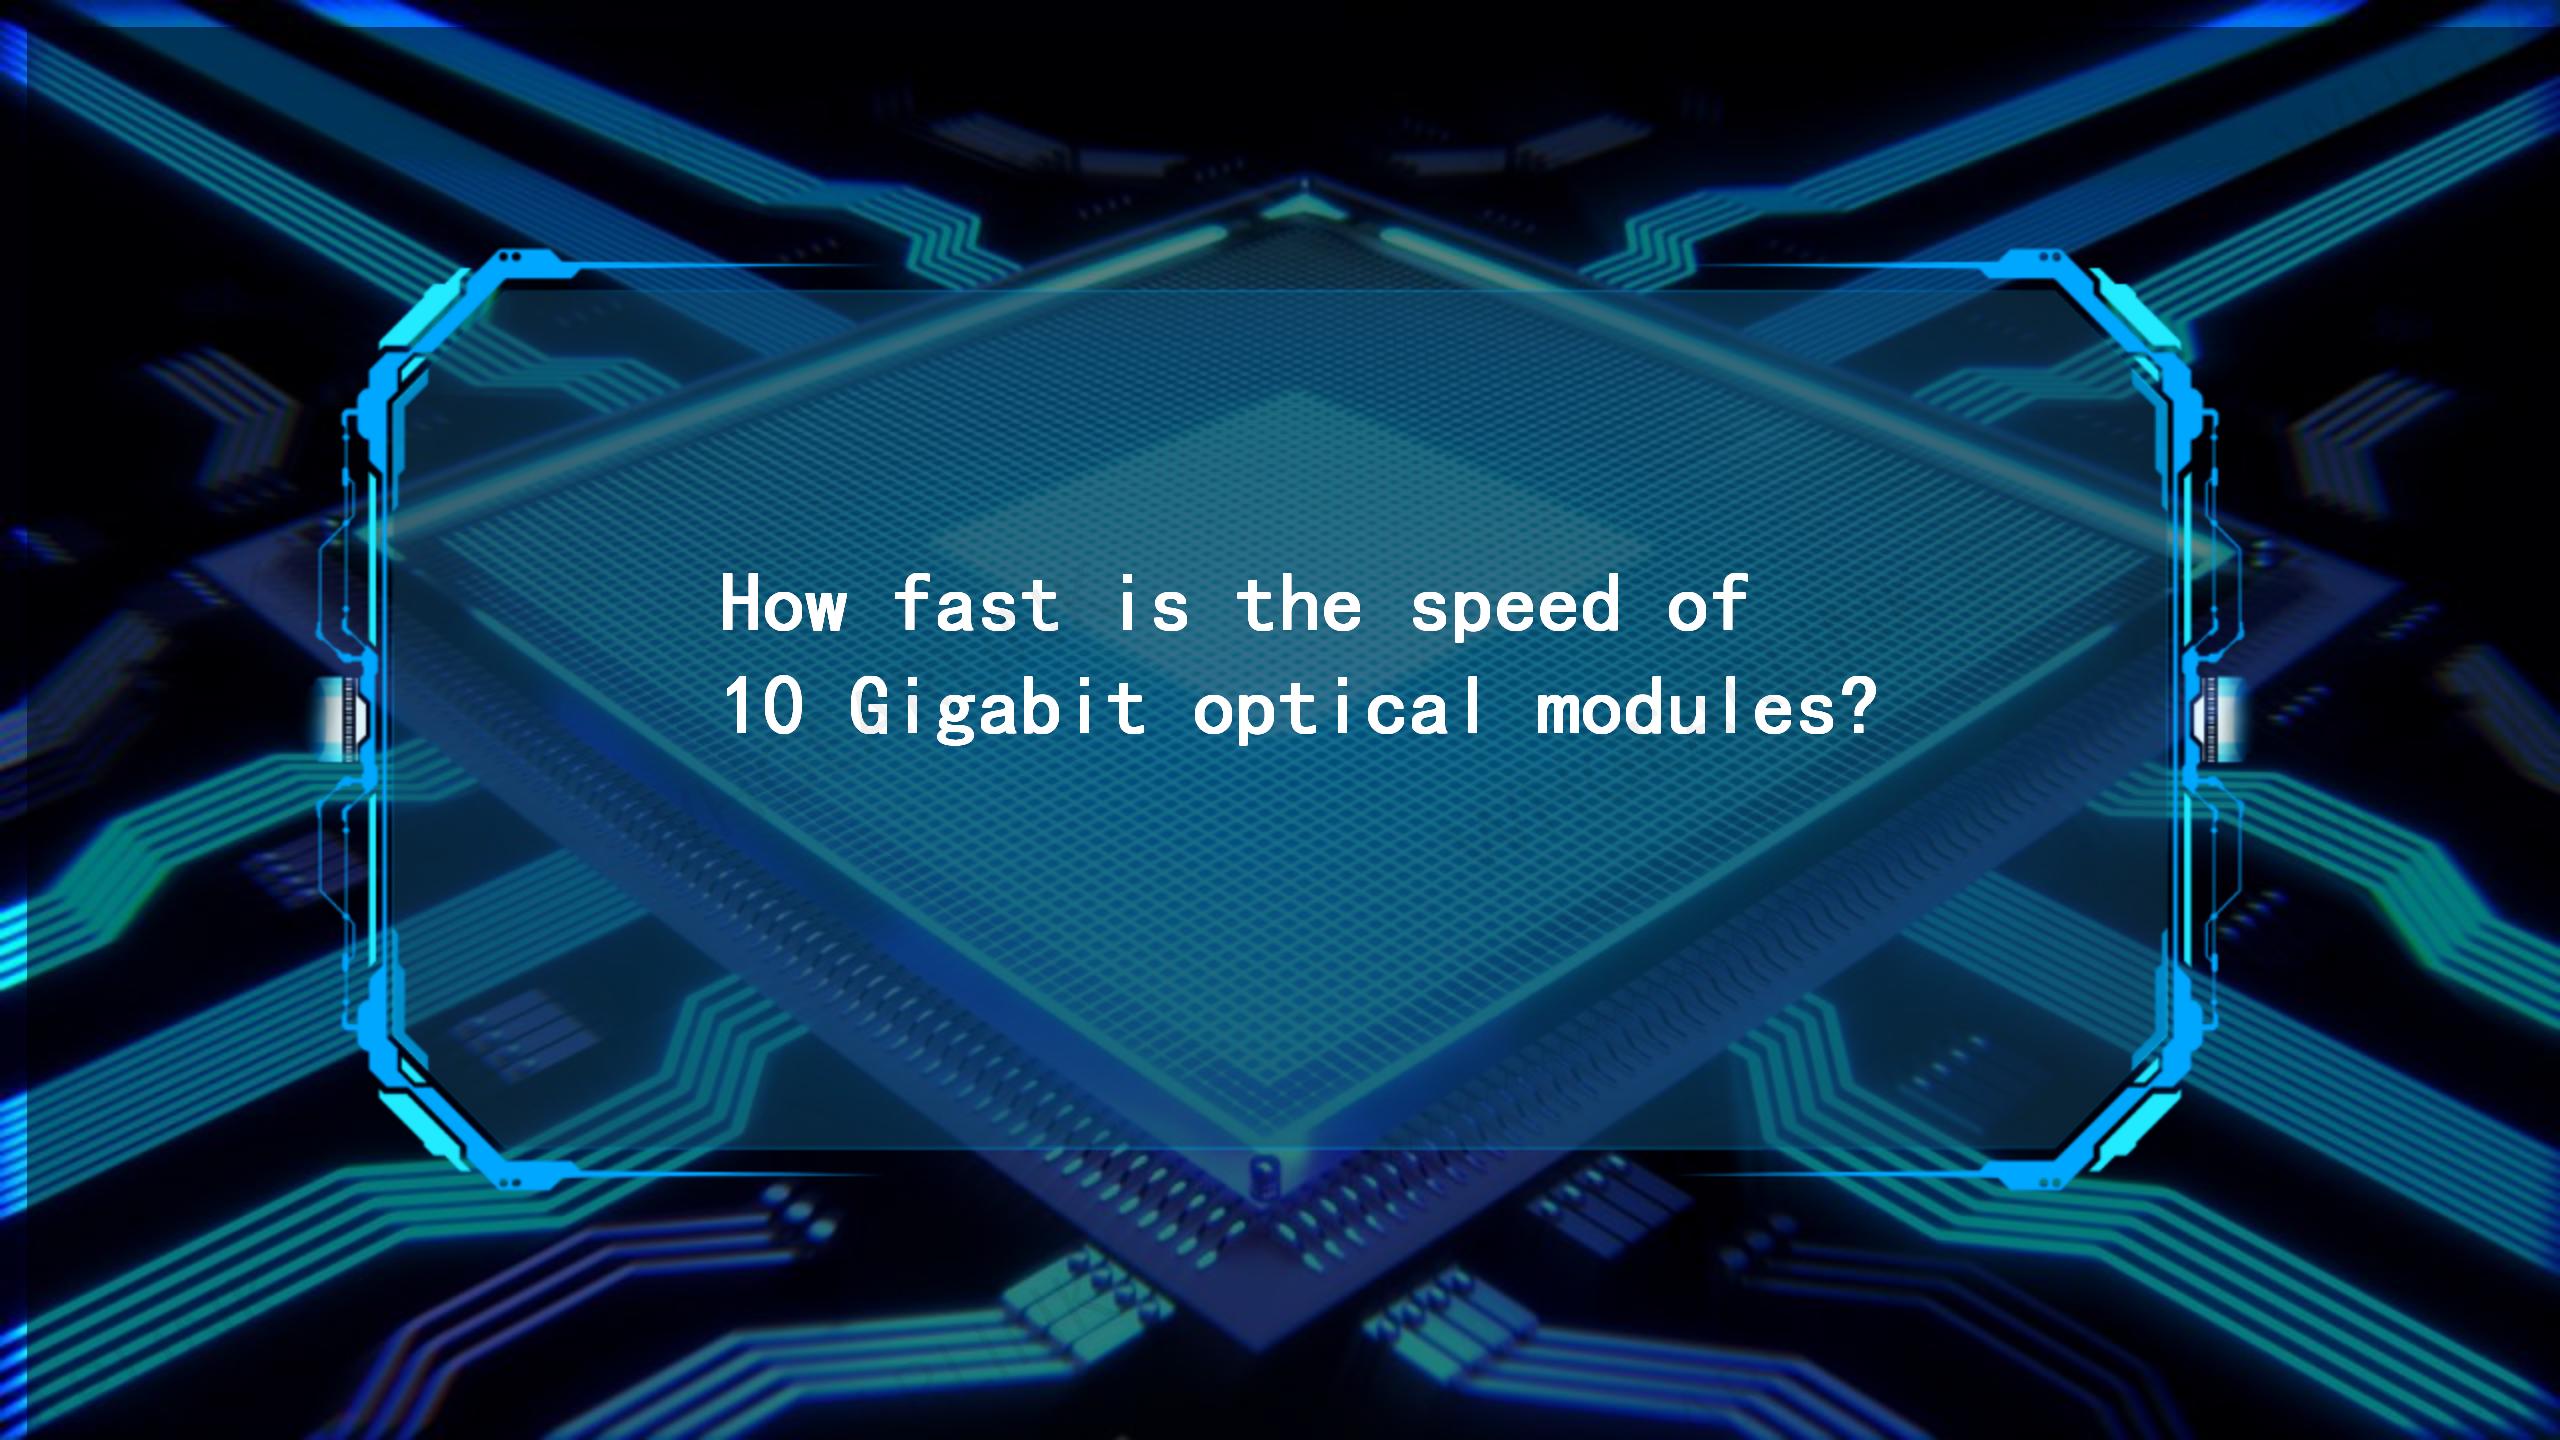 How fast is the speed of 10 Gigabit optical modules?